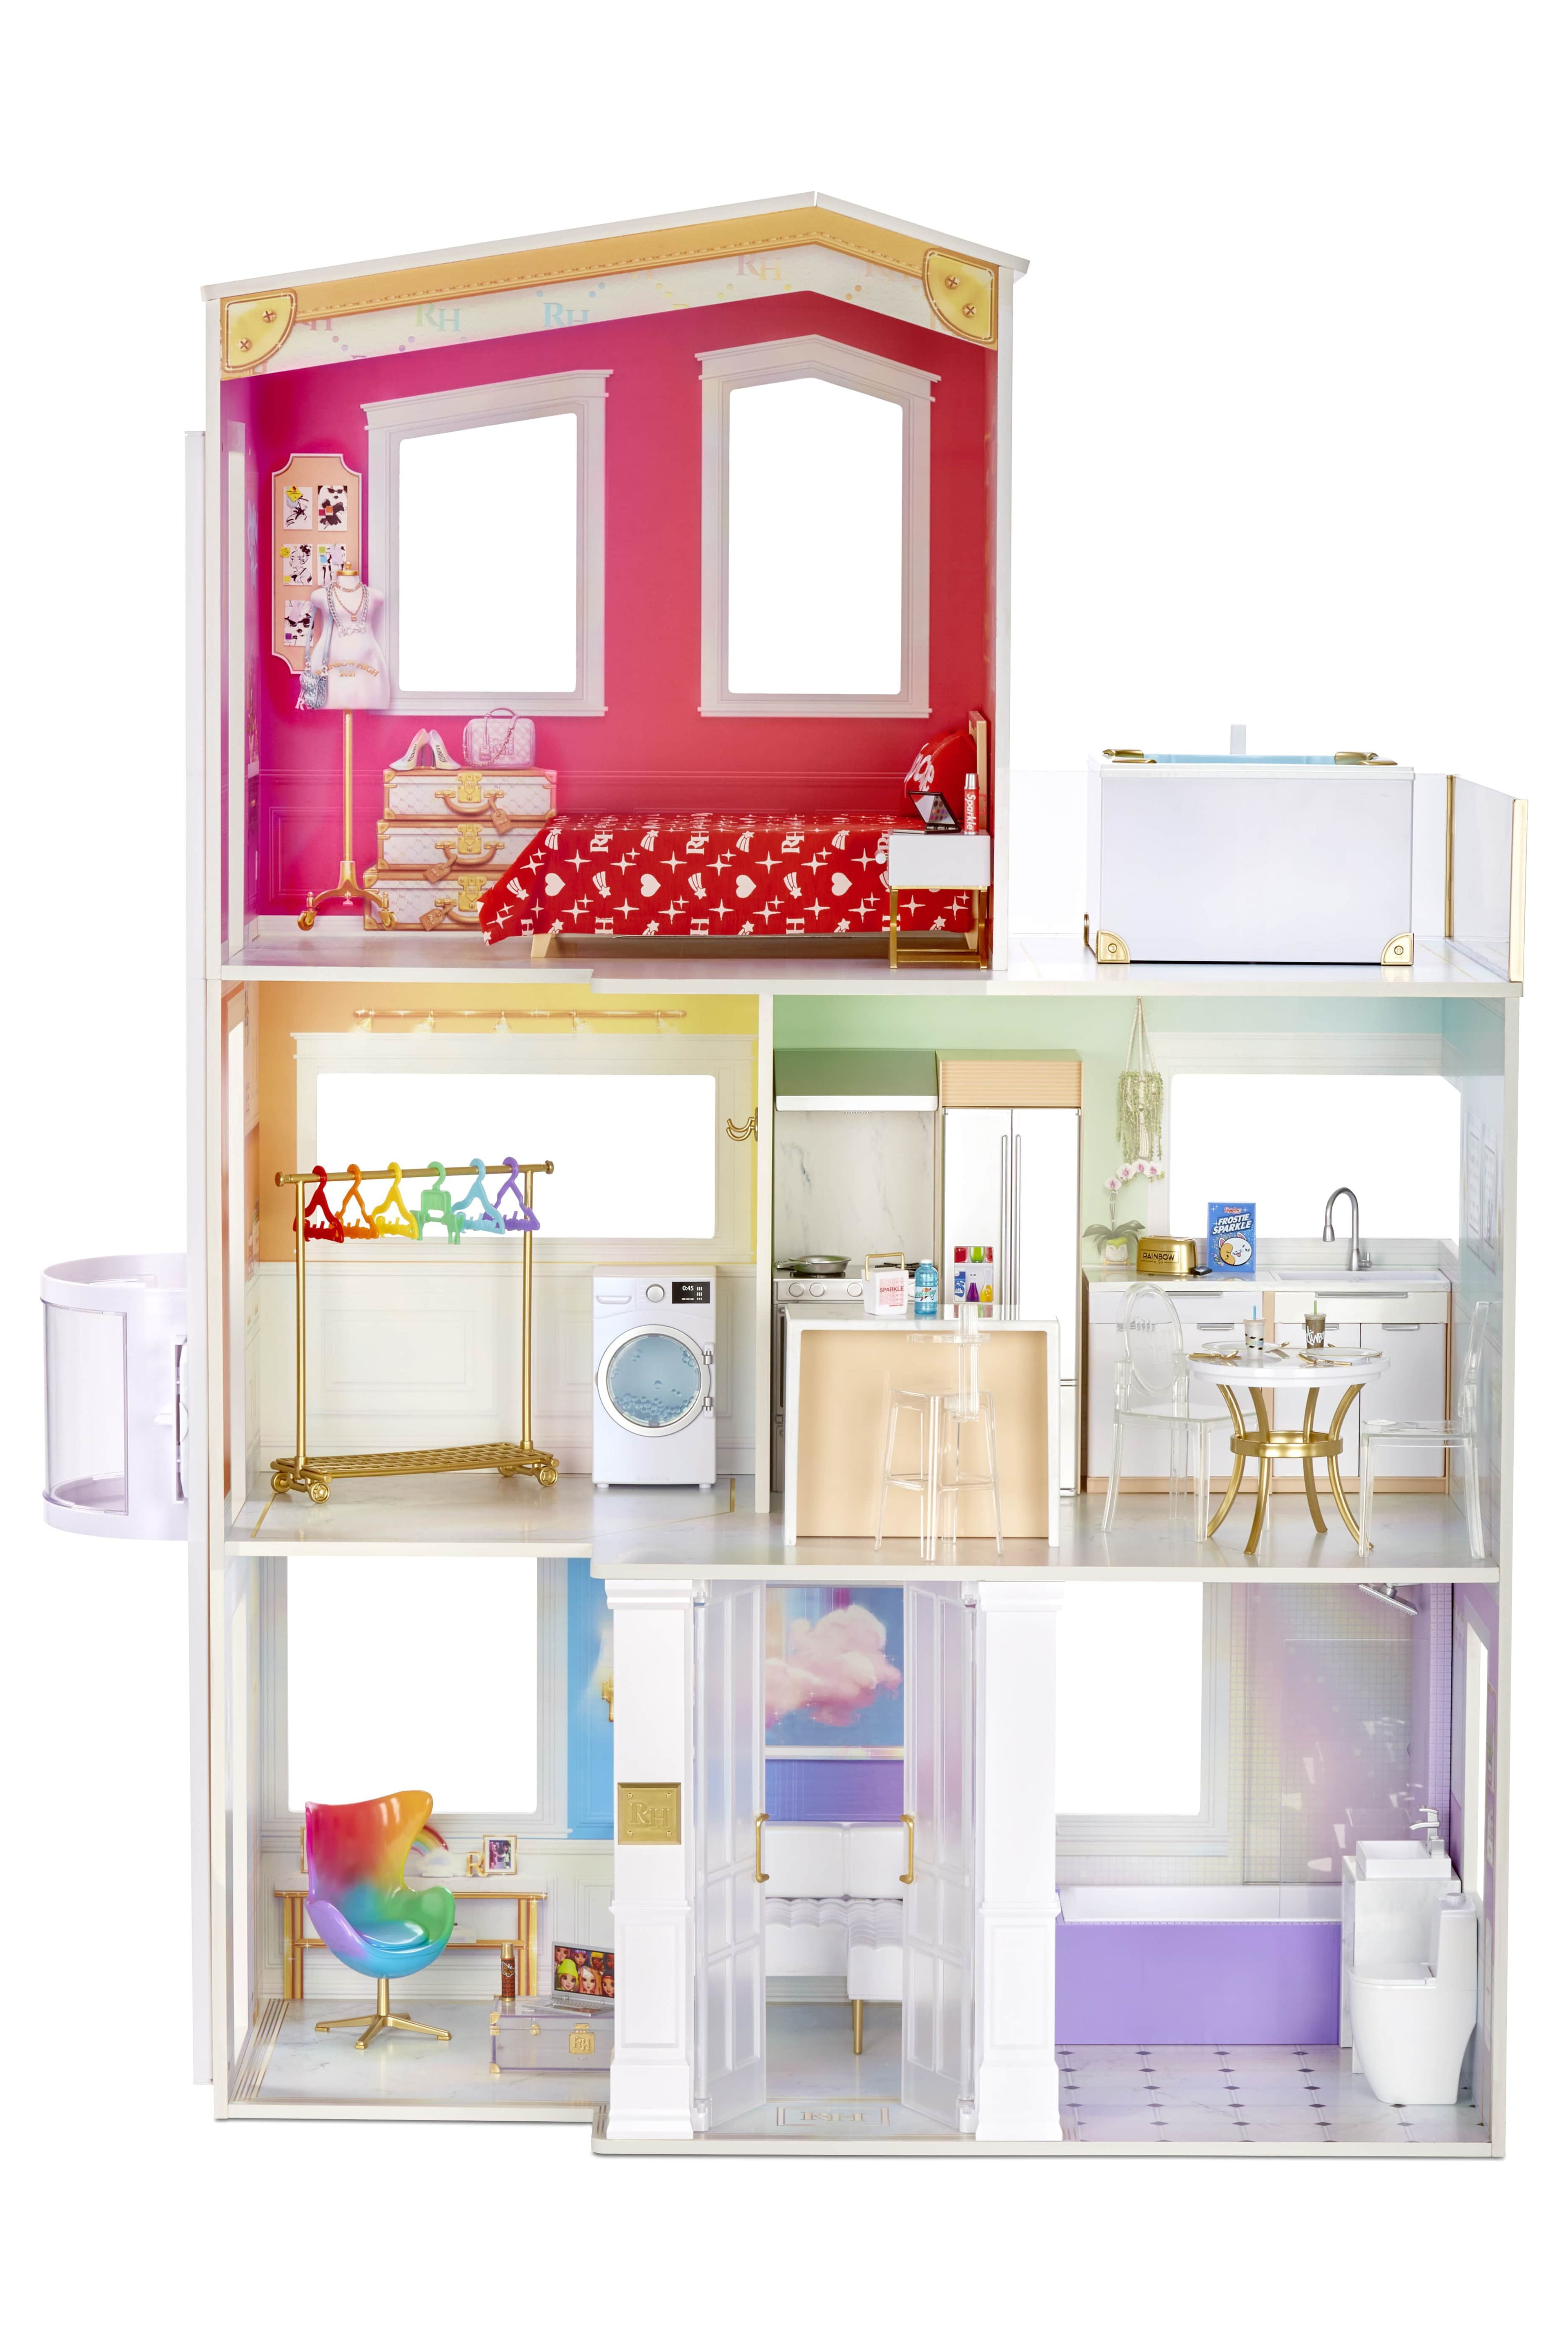 Rainbow High Townhouse 3-Story Wood Dollhouse Playset, 5 Colorful Rooms &  Rooftop Patio. Fully Furnished Fashion Home, Elevator, Accessories, Toy  Gift Kids Ages 4 to12+ 